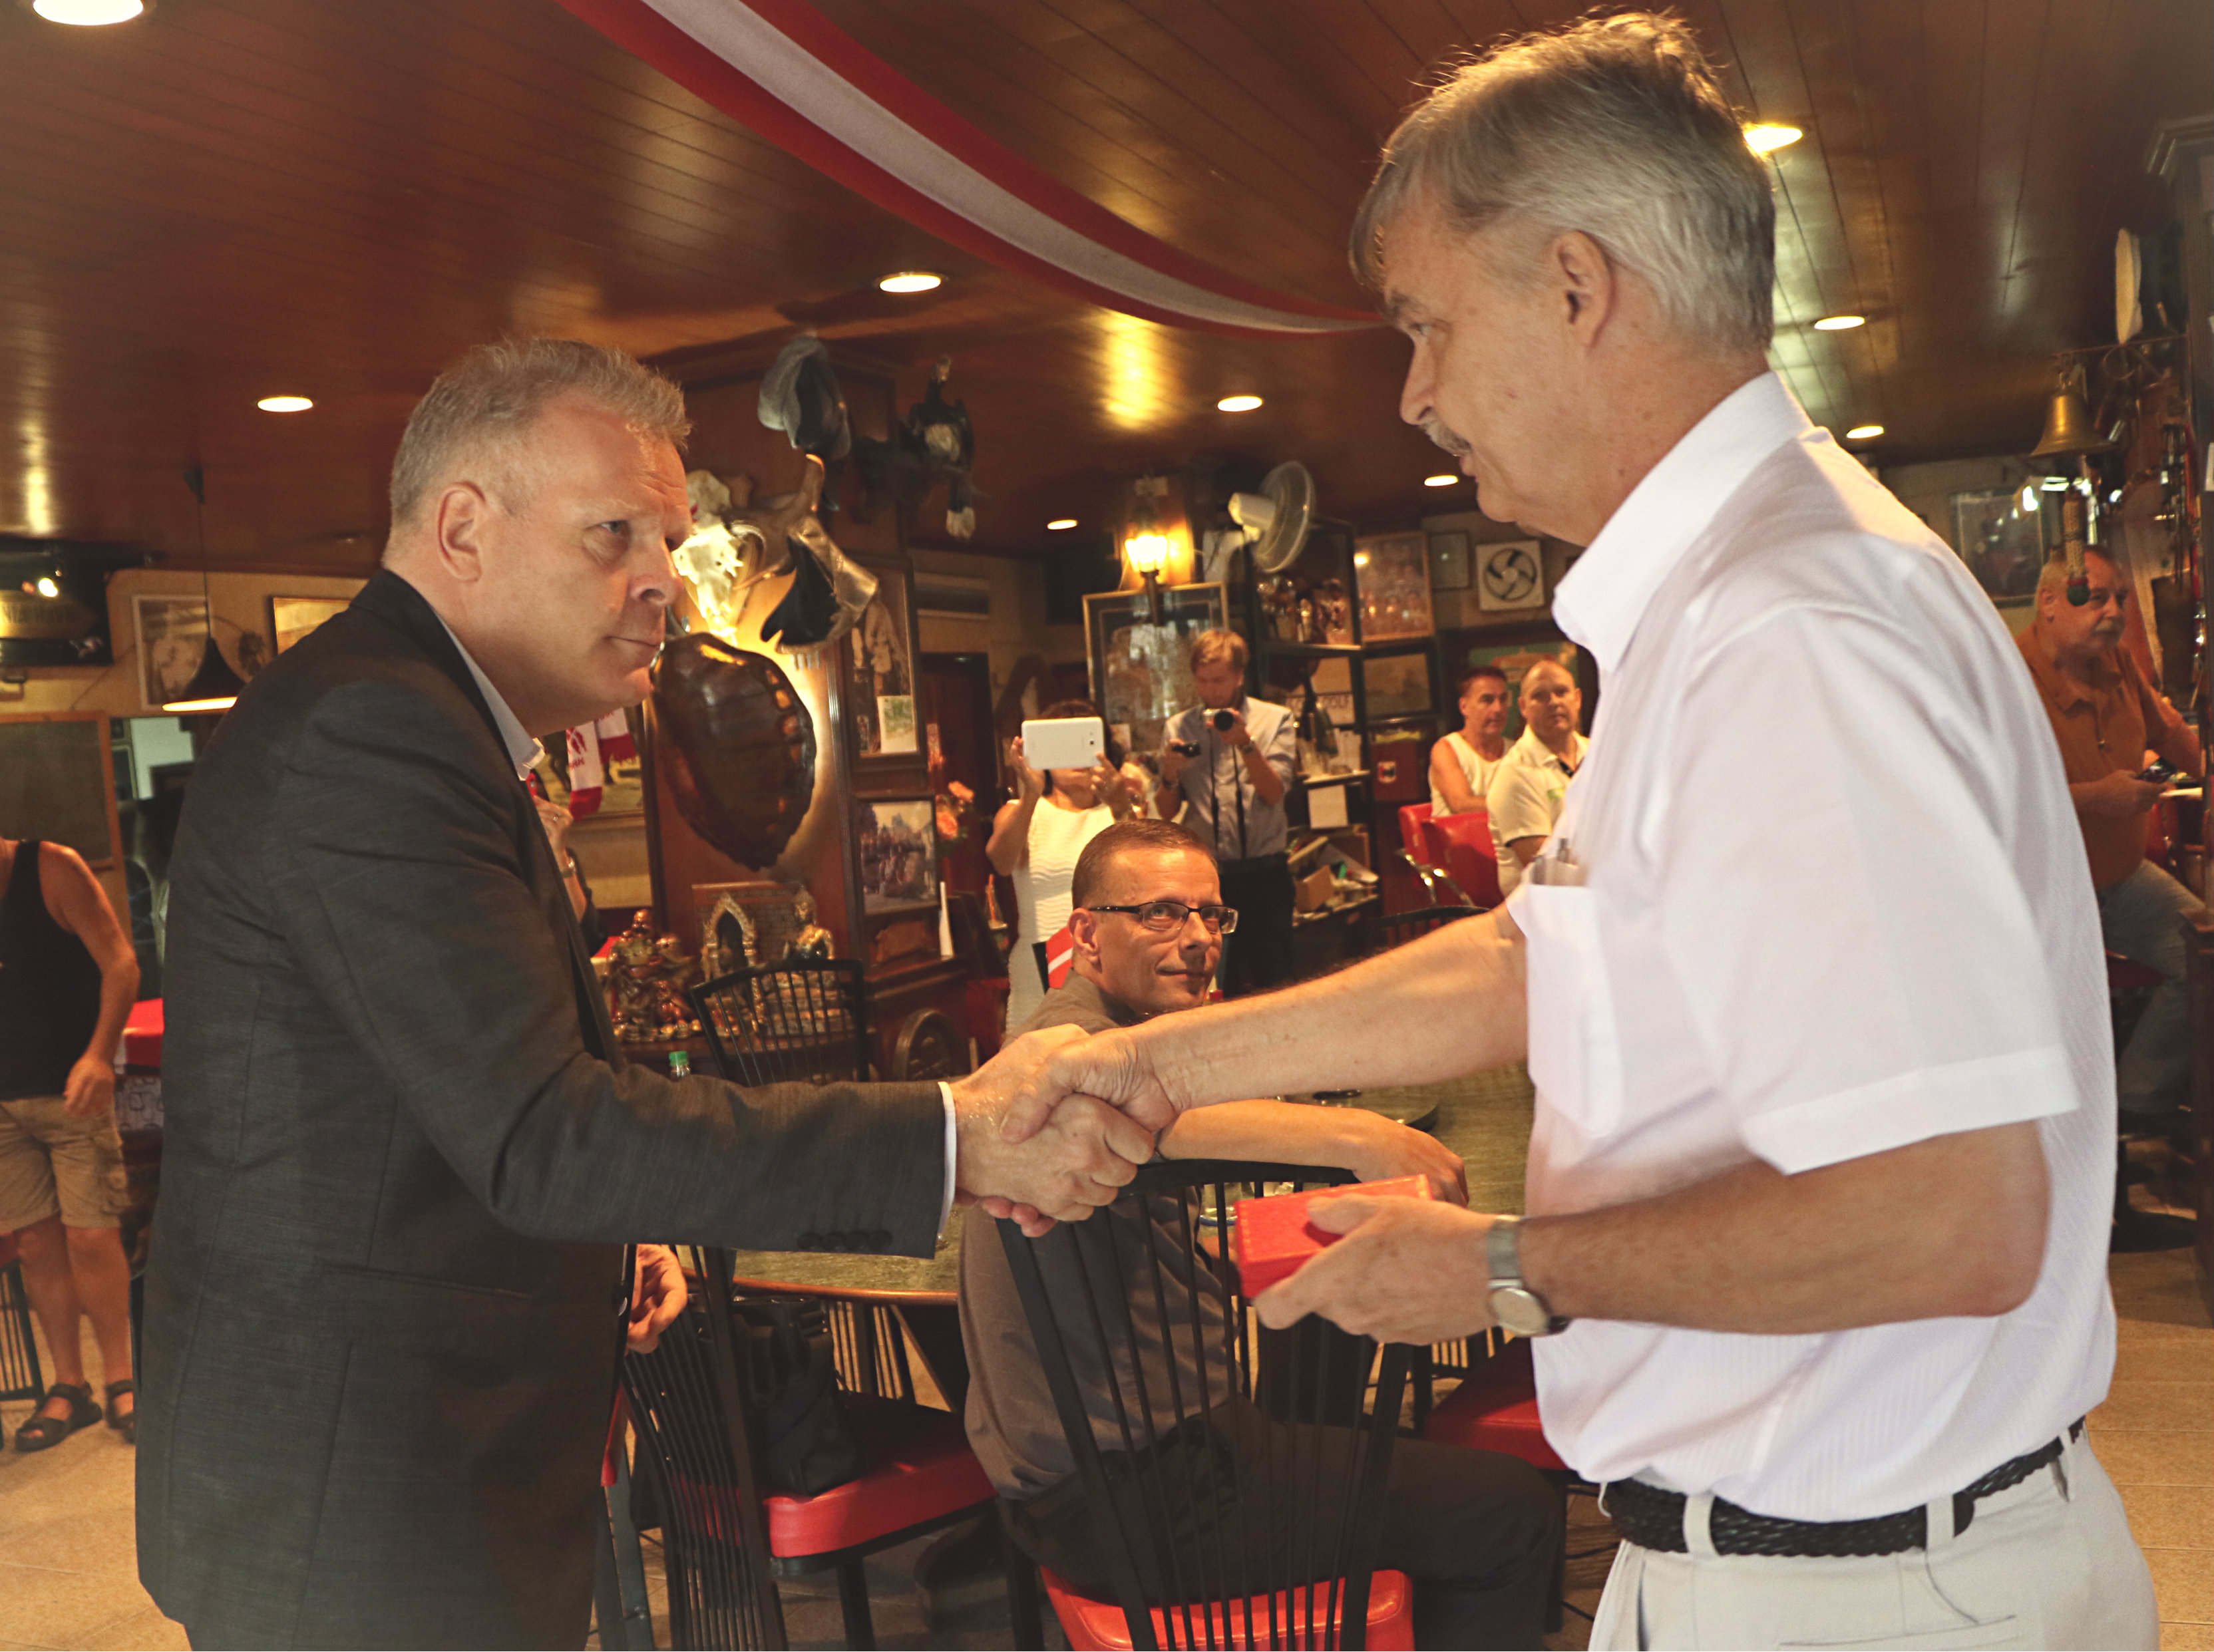 The Danish Ambassador Mikael Hemniti Winther presents Stig Vagt-Andersen with the Order of the Dannebrog, Knight 1st Class, for his exceptional work as a Consul in Pattaya. Photo by Louise Bihl Frandsen